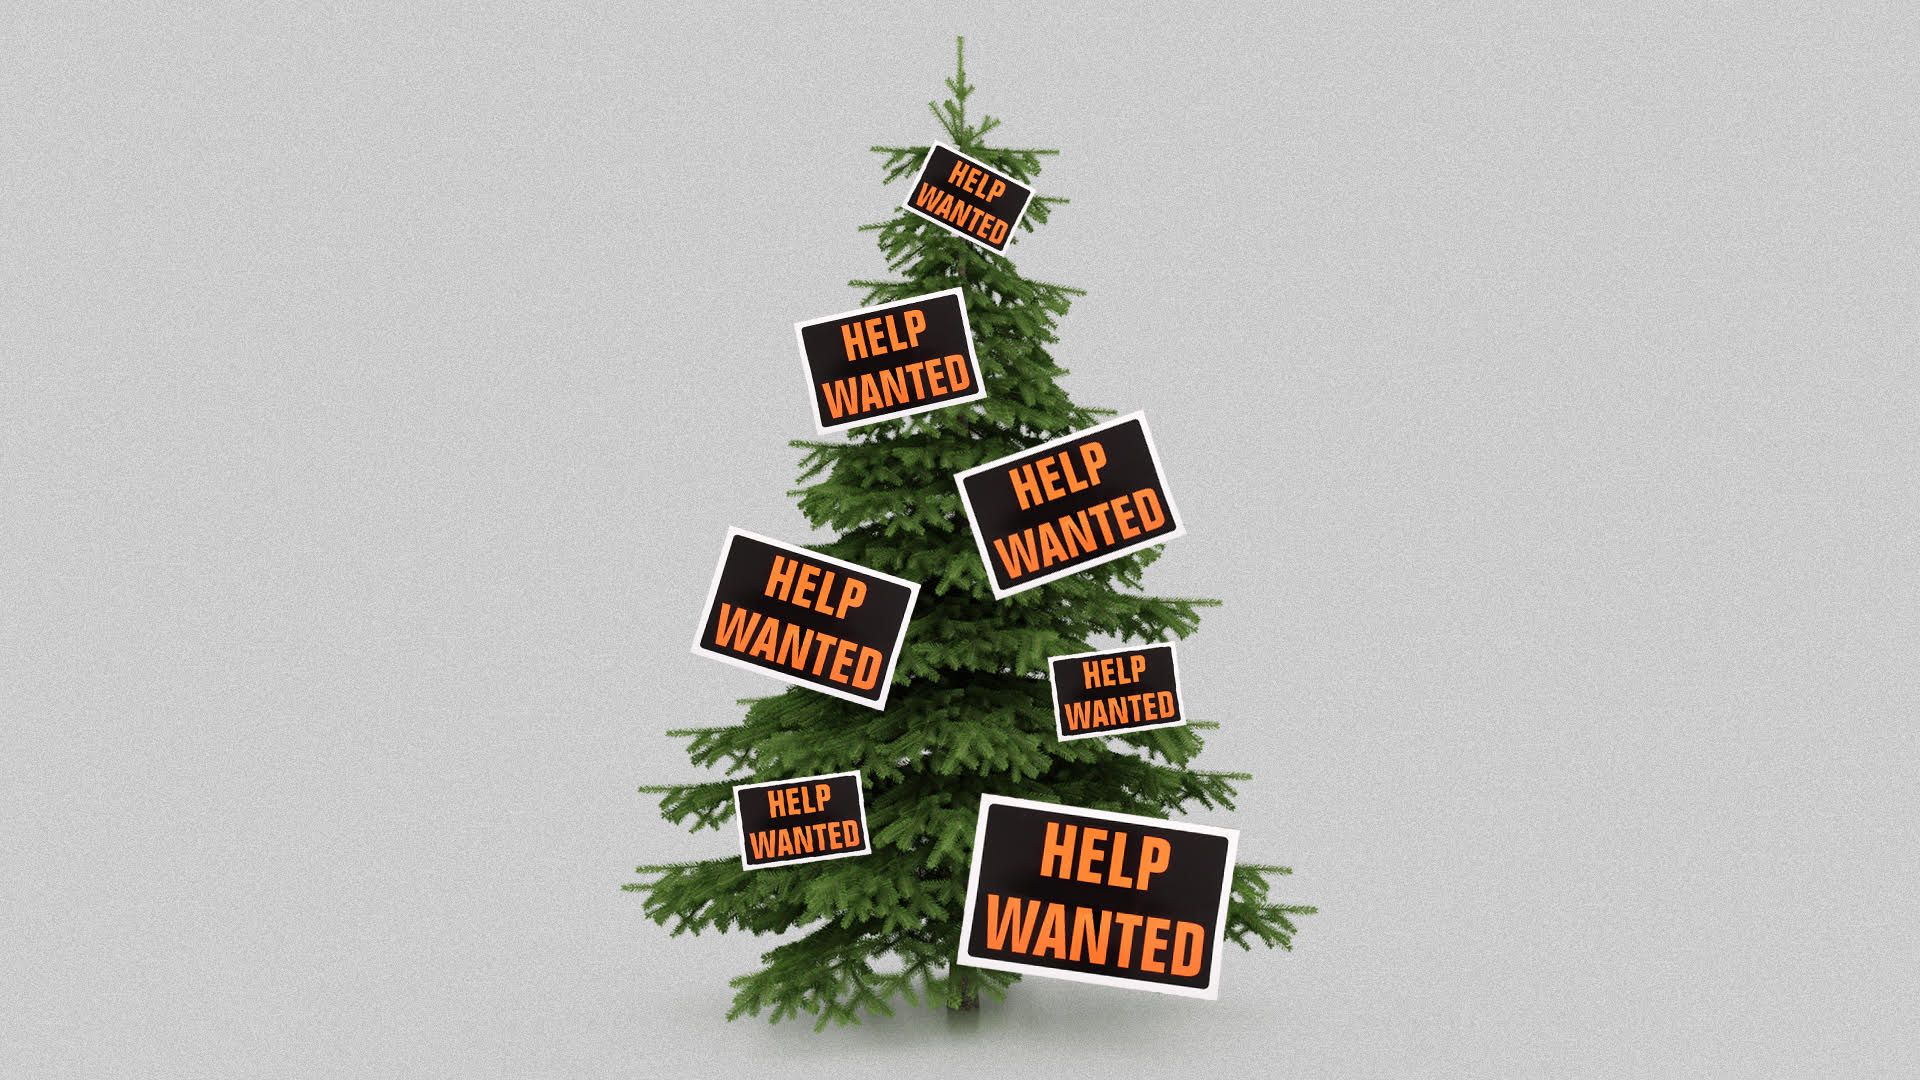 A Christmas tree with "help wanted" signs, instead of ornaments. 